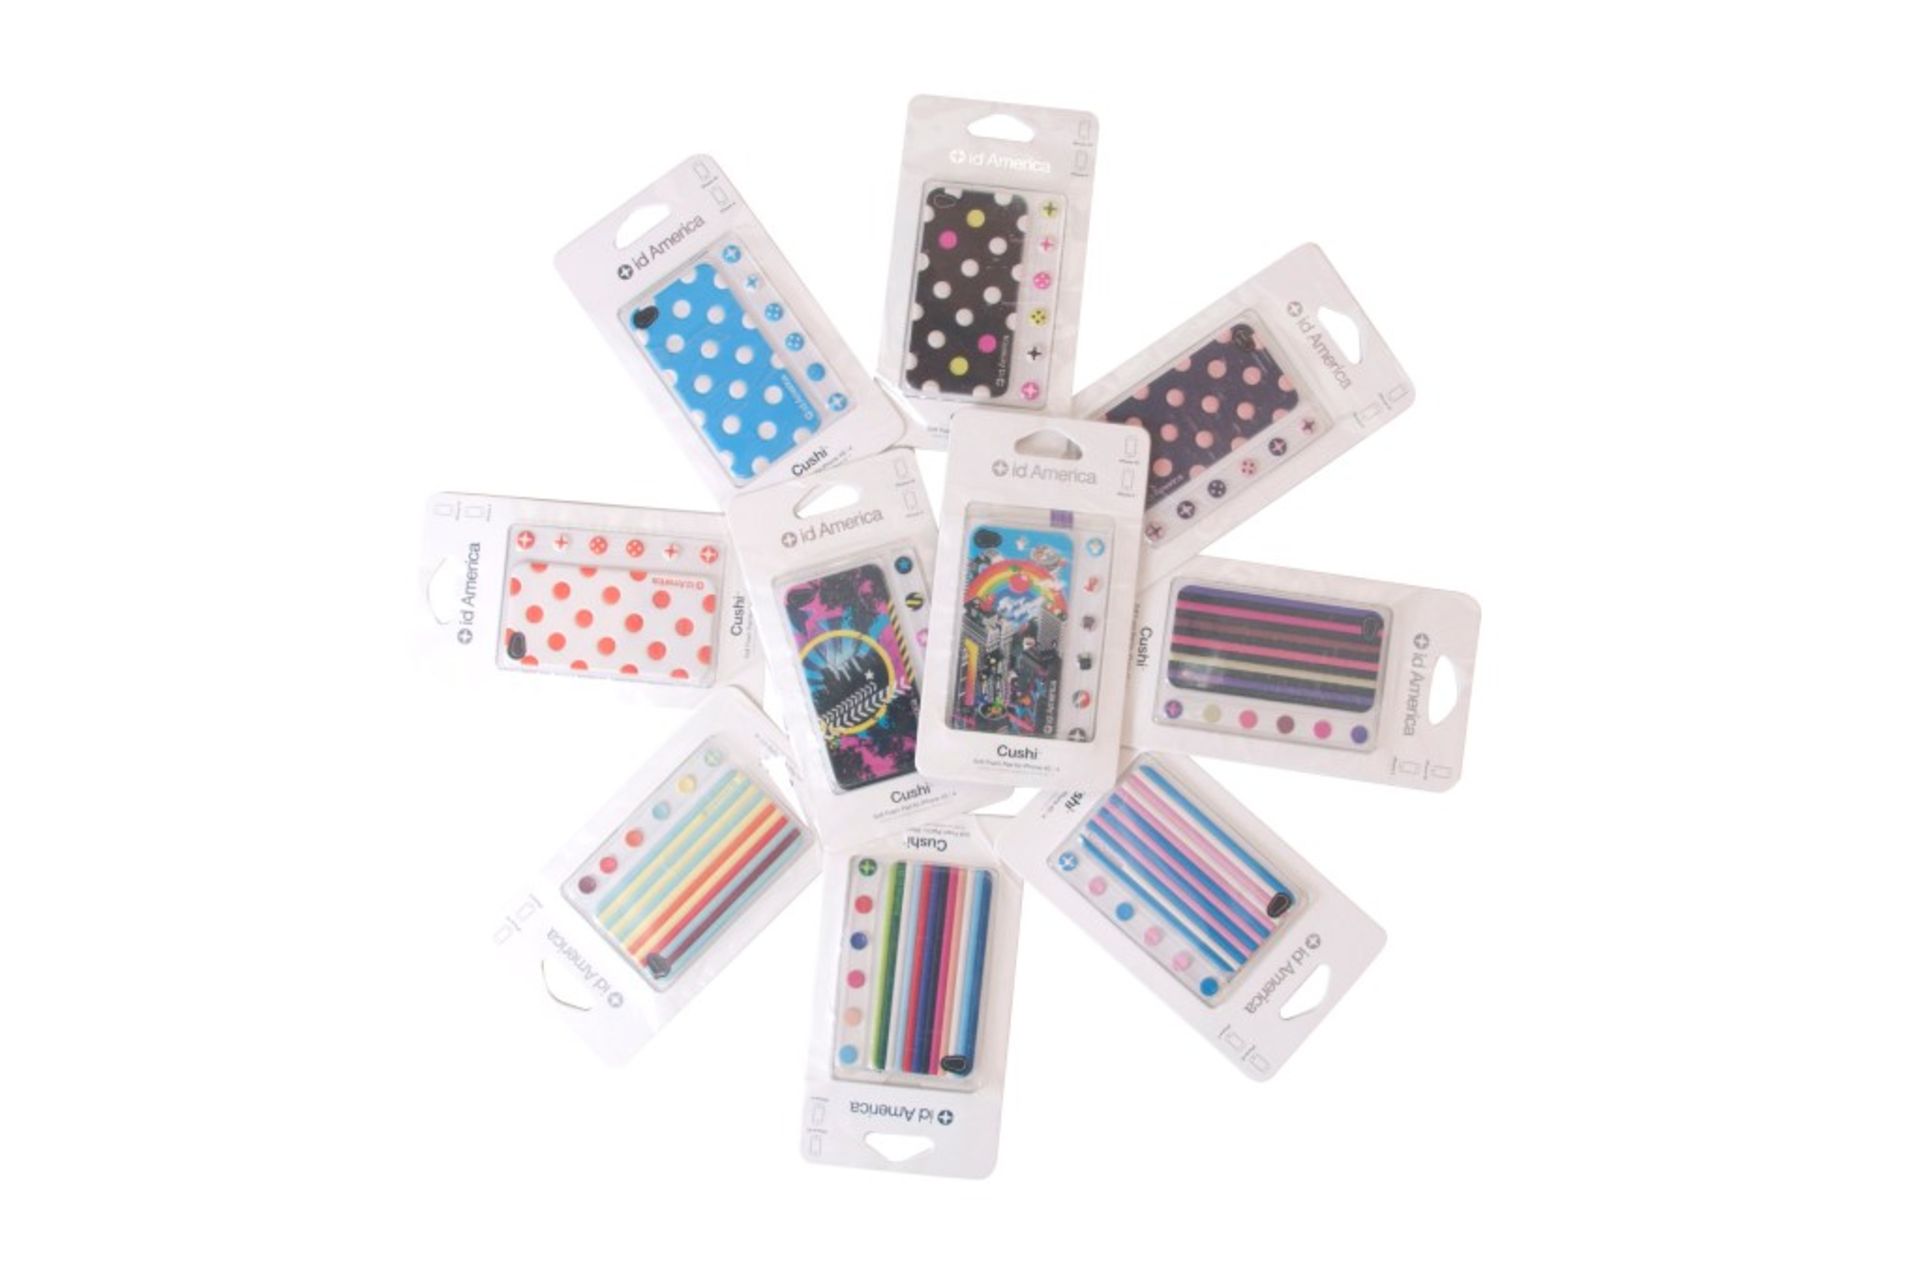 86x Cushi iPhone 4 Cases In Various Designs - Image 2 of 2